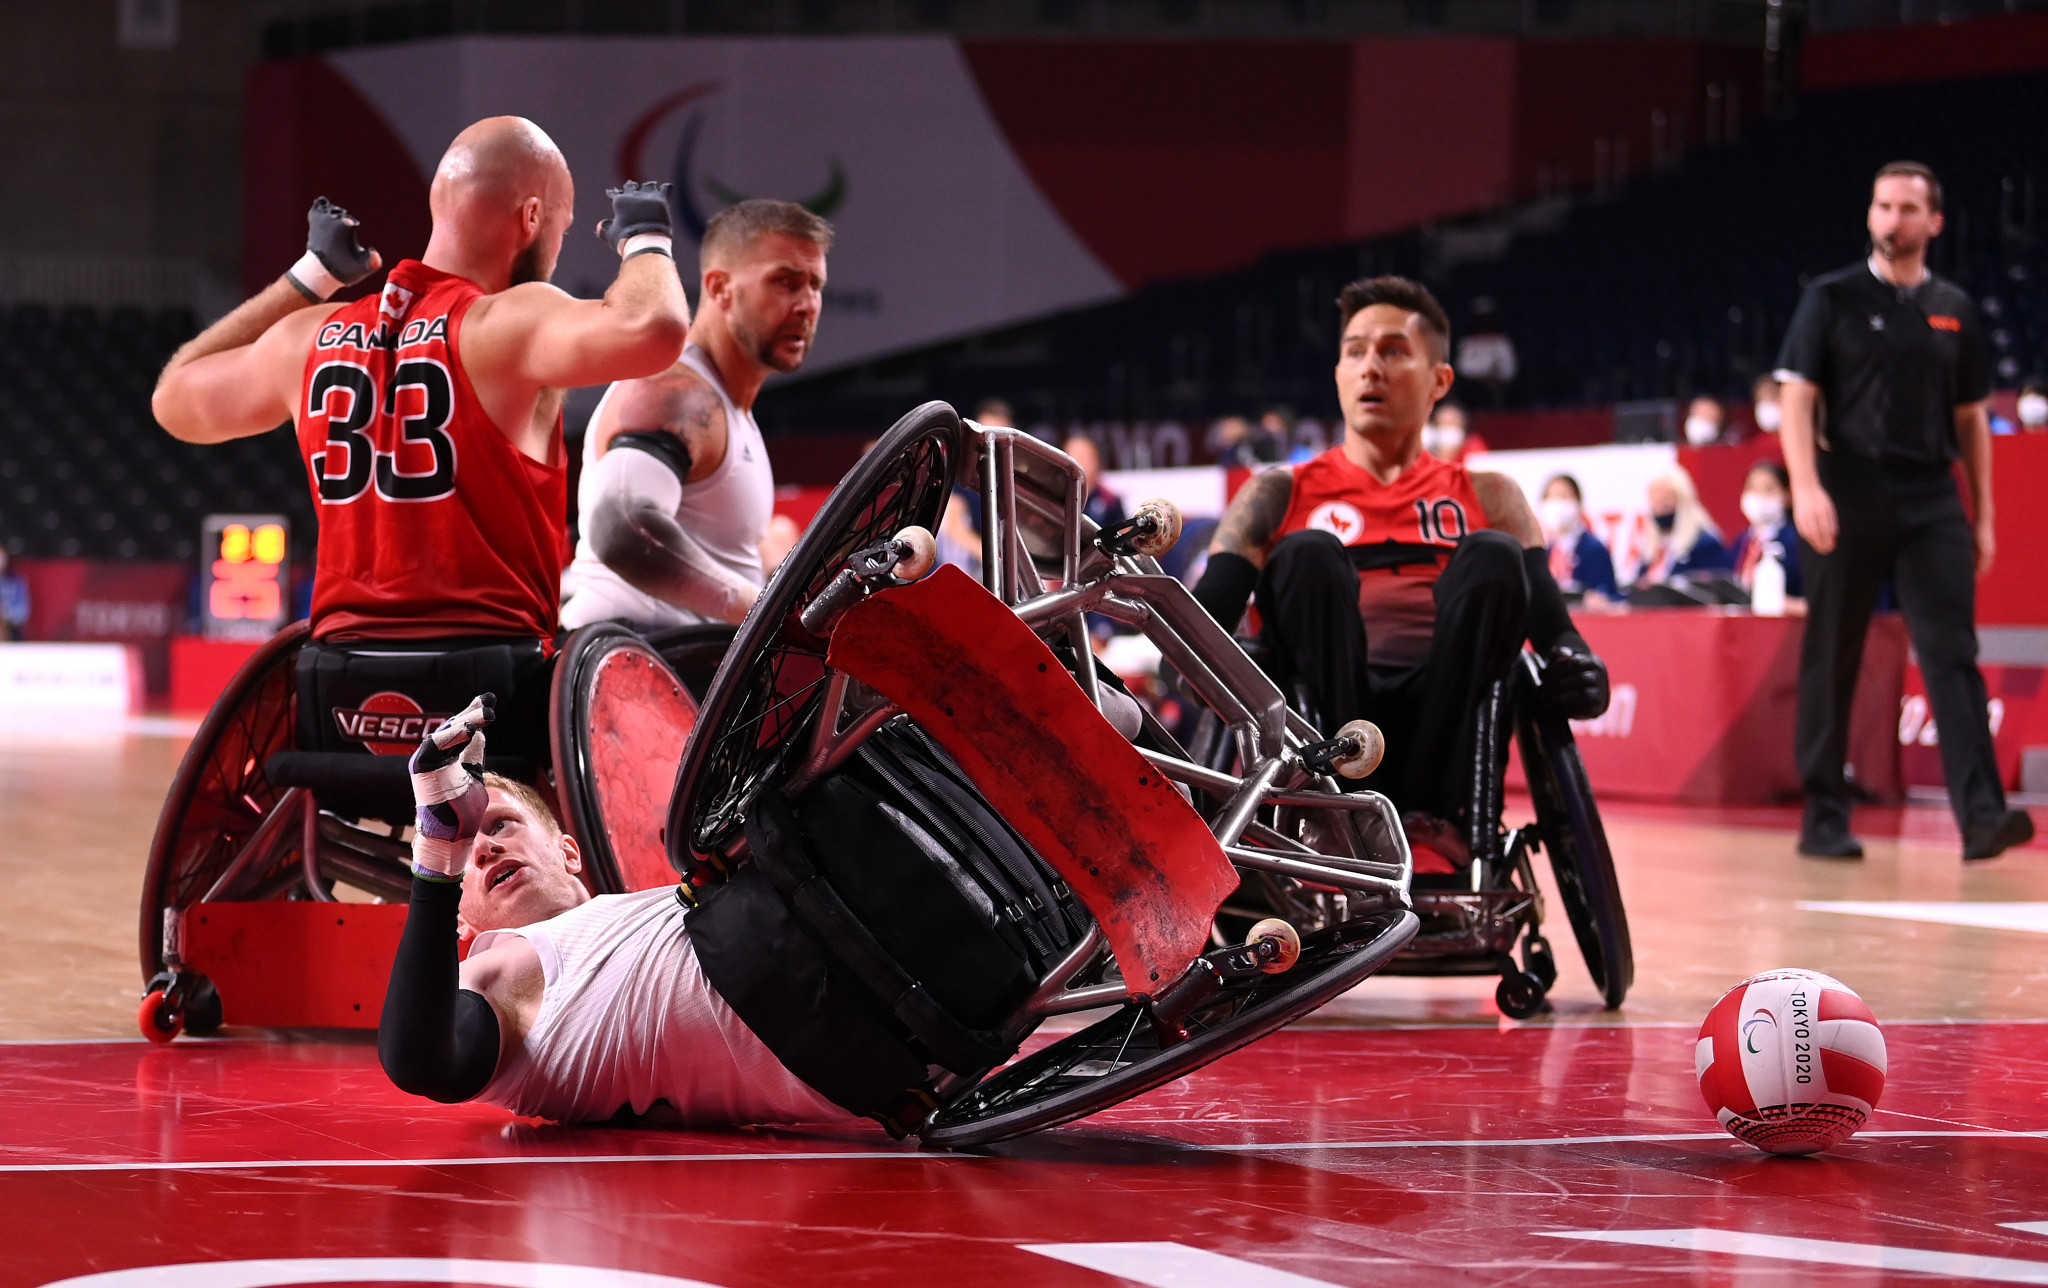 Cardiff to stage wheelchair rugby's Quad Nations tournament